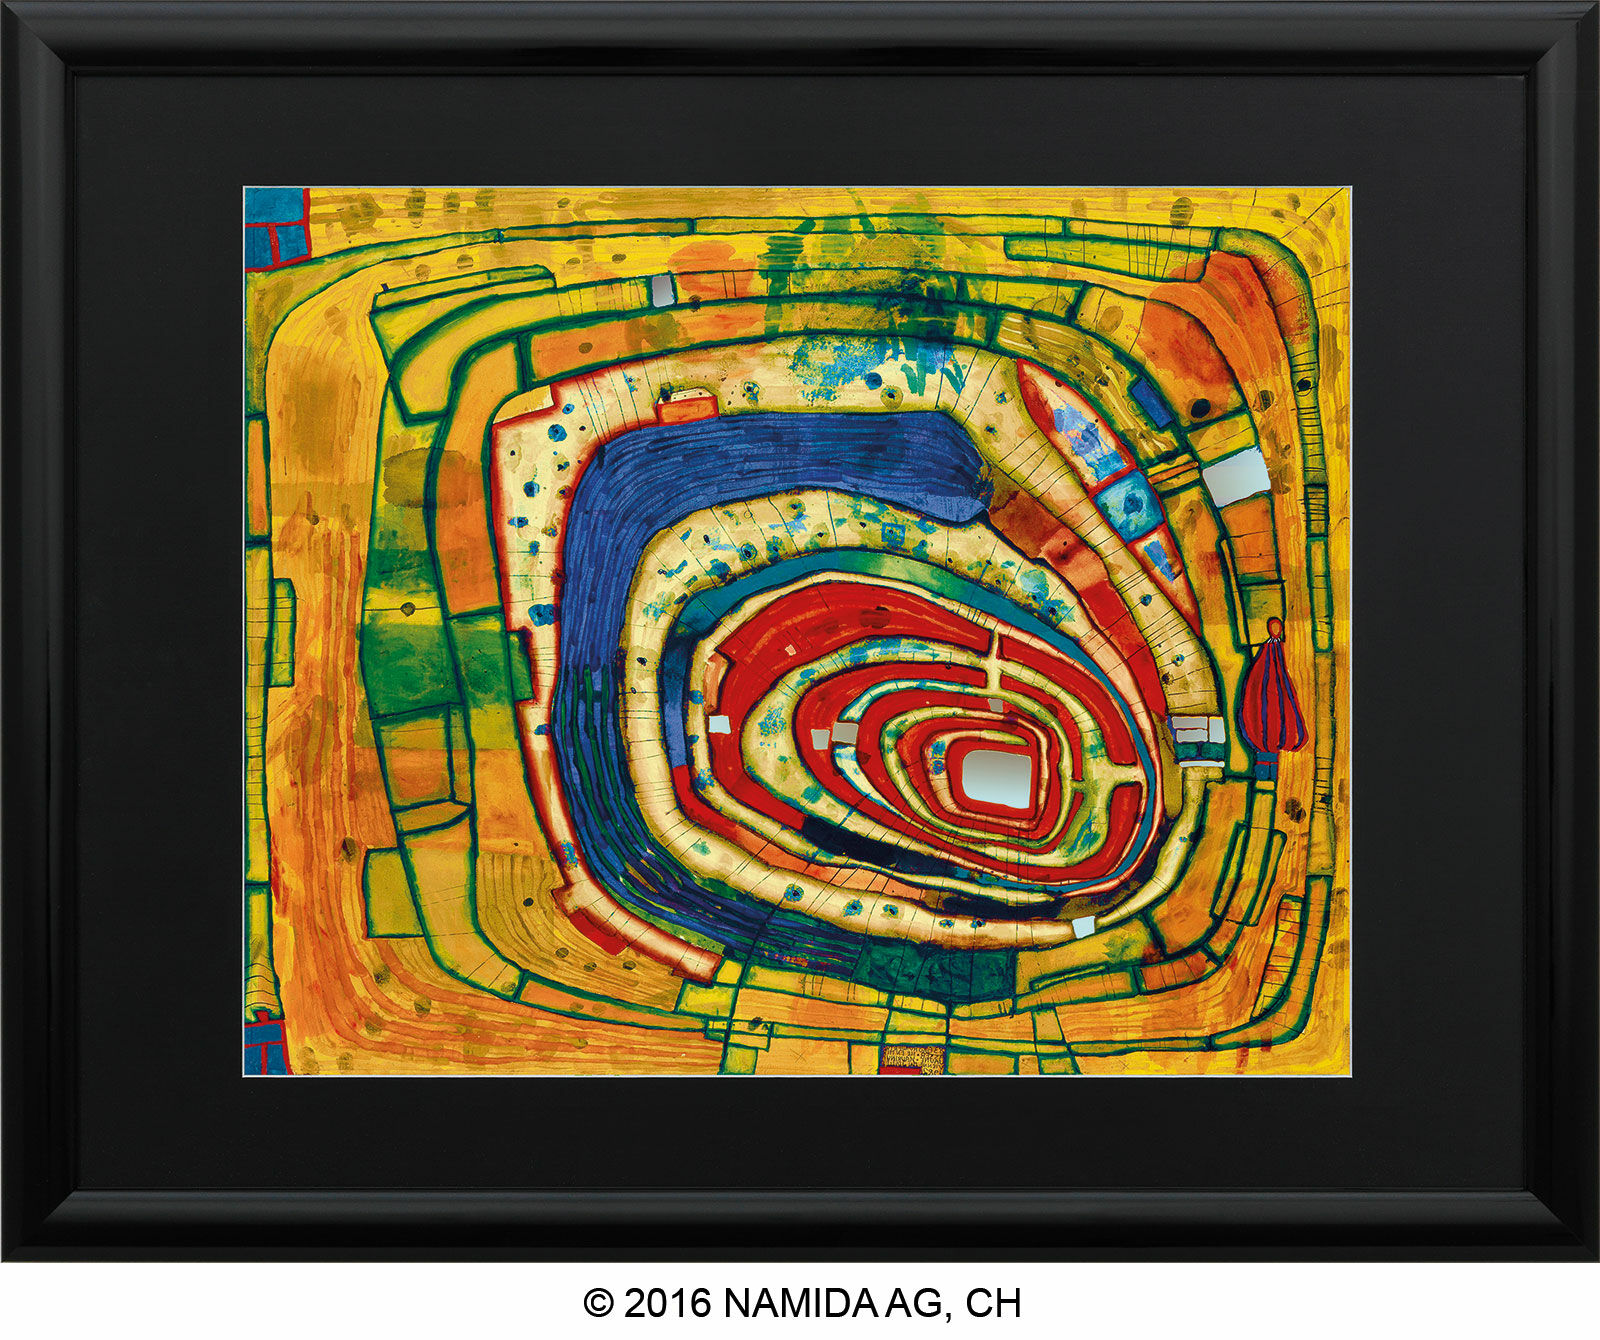 Picture "(836) Island in the Yellow Sea", framed by Friedensreich Hundertwasser